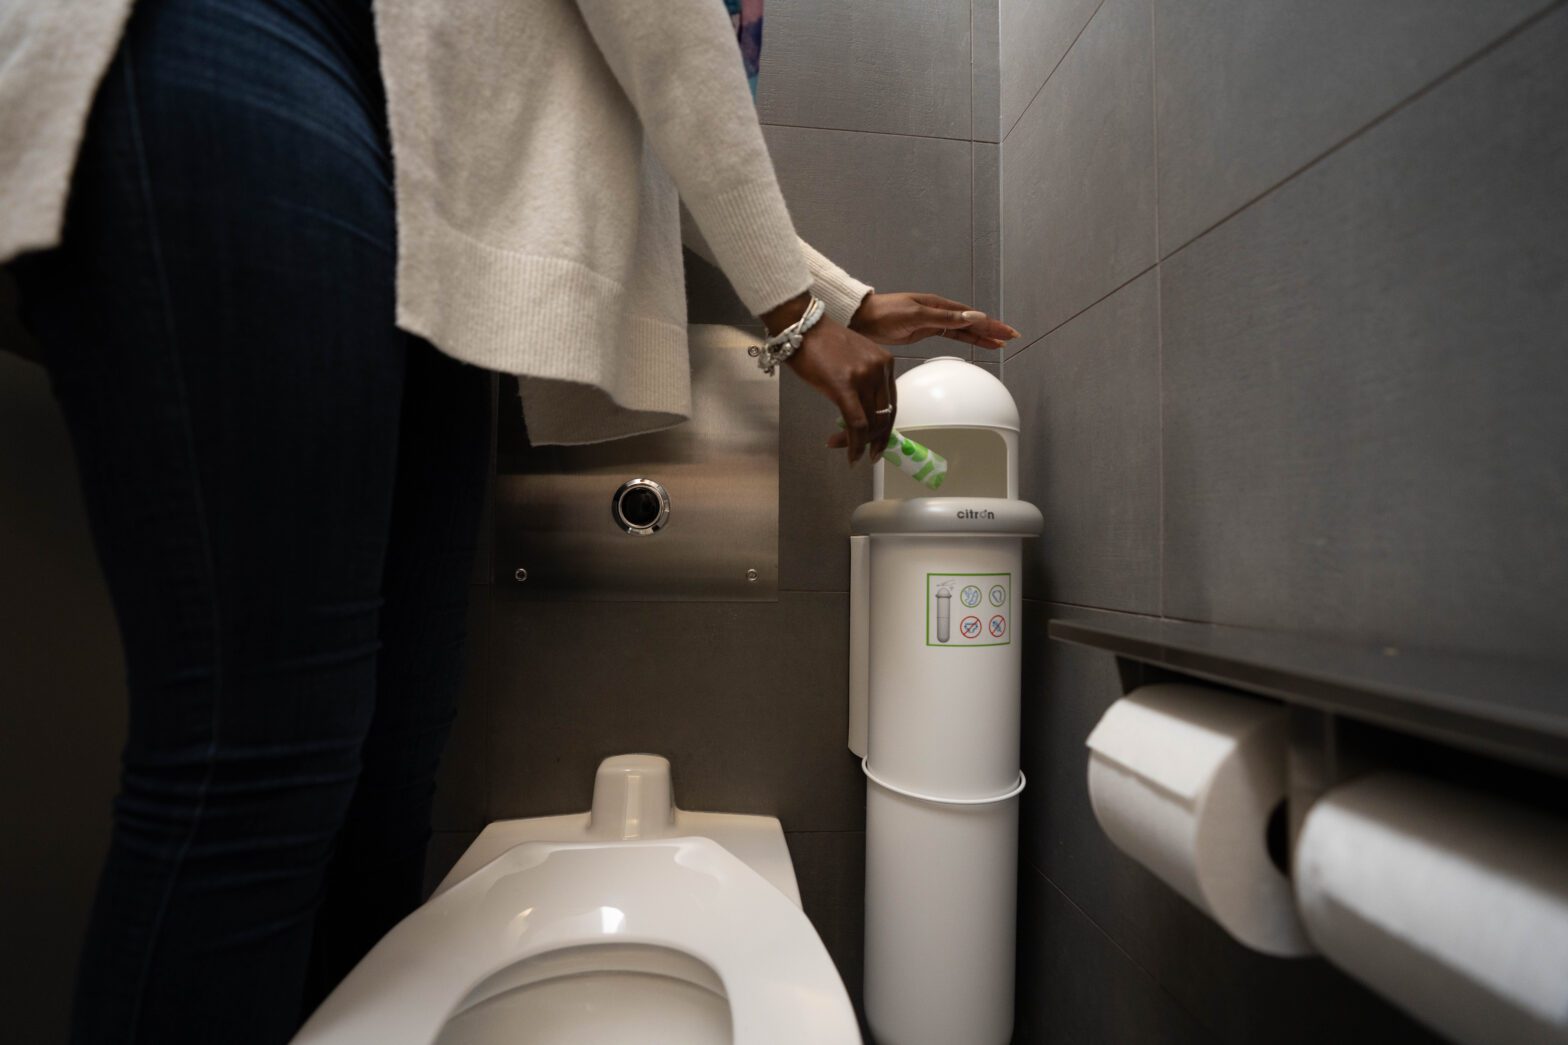 Woman disposal of tampon in a Menstrual hygiene disposal unit